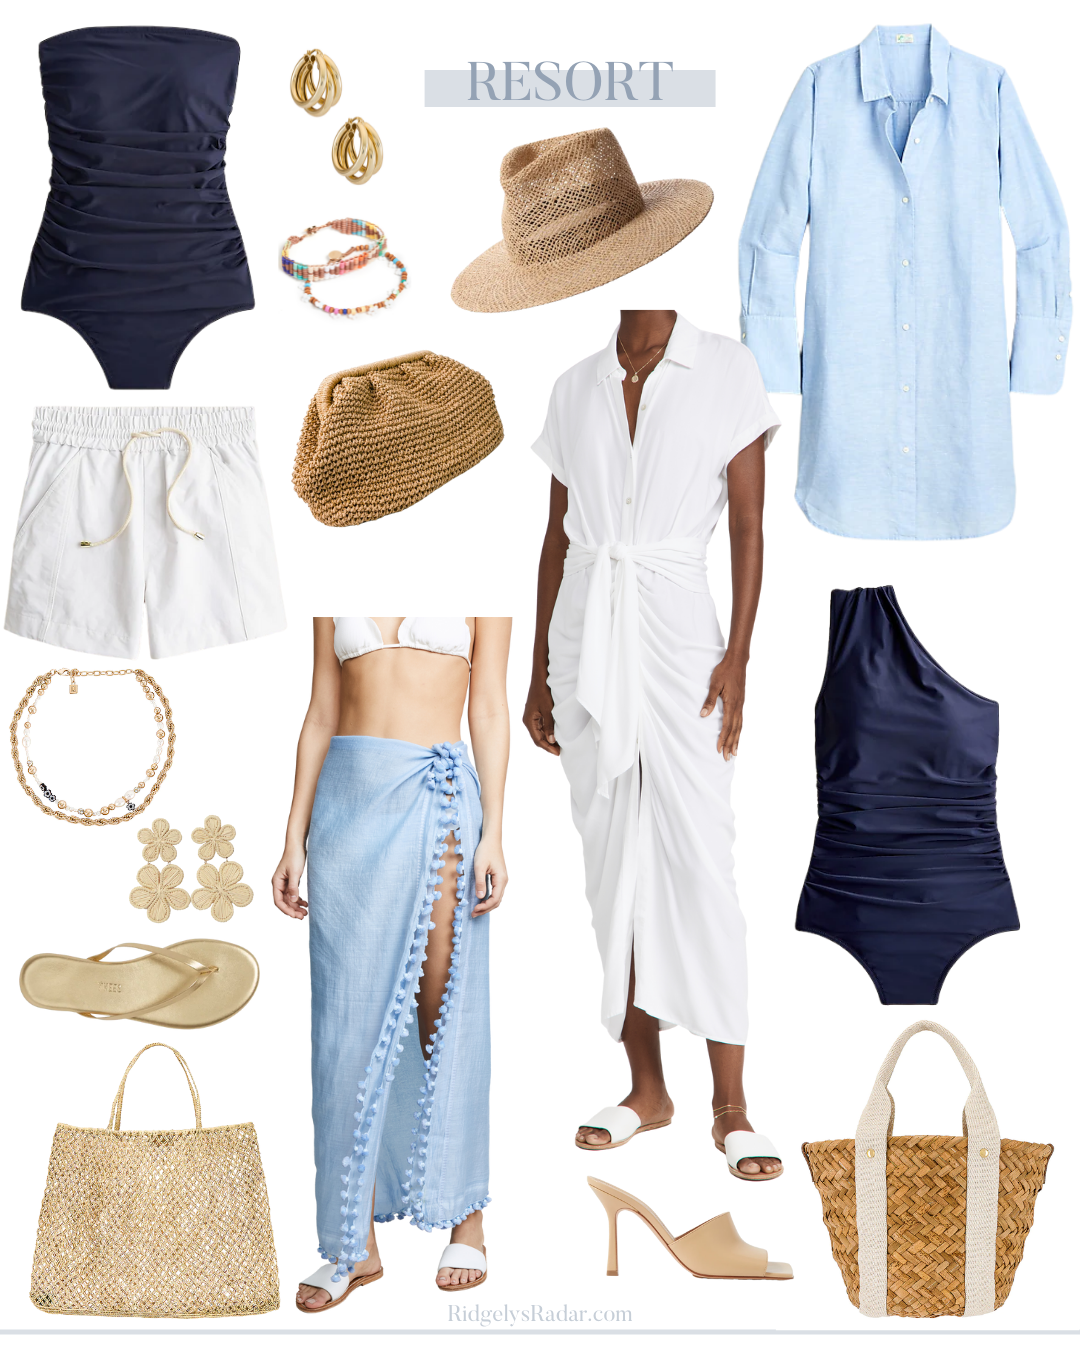 Resort Time is Here! Are you traveling after the Holidays or in the New Year? Here are some clothes and accessories to freshen your wardrobe.